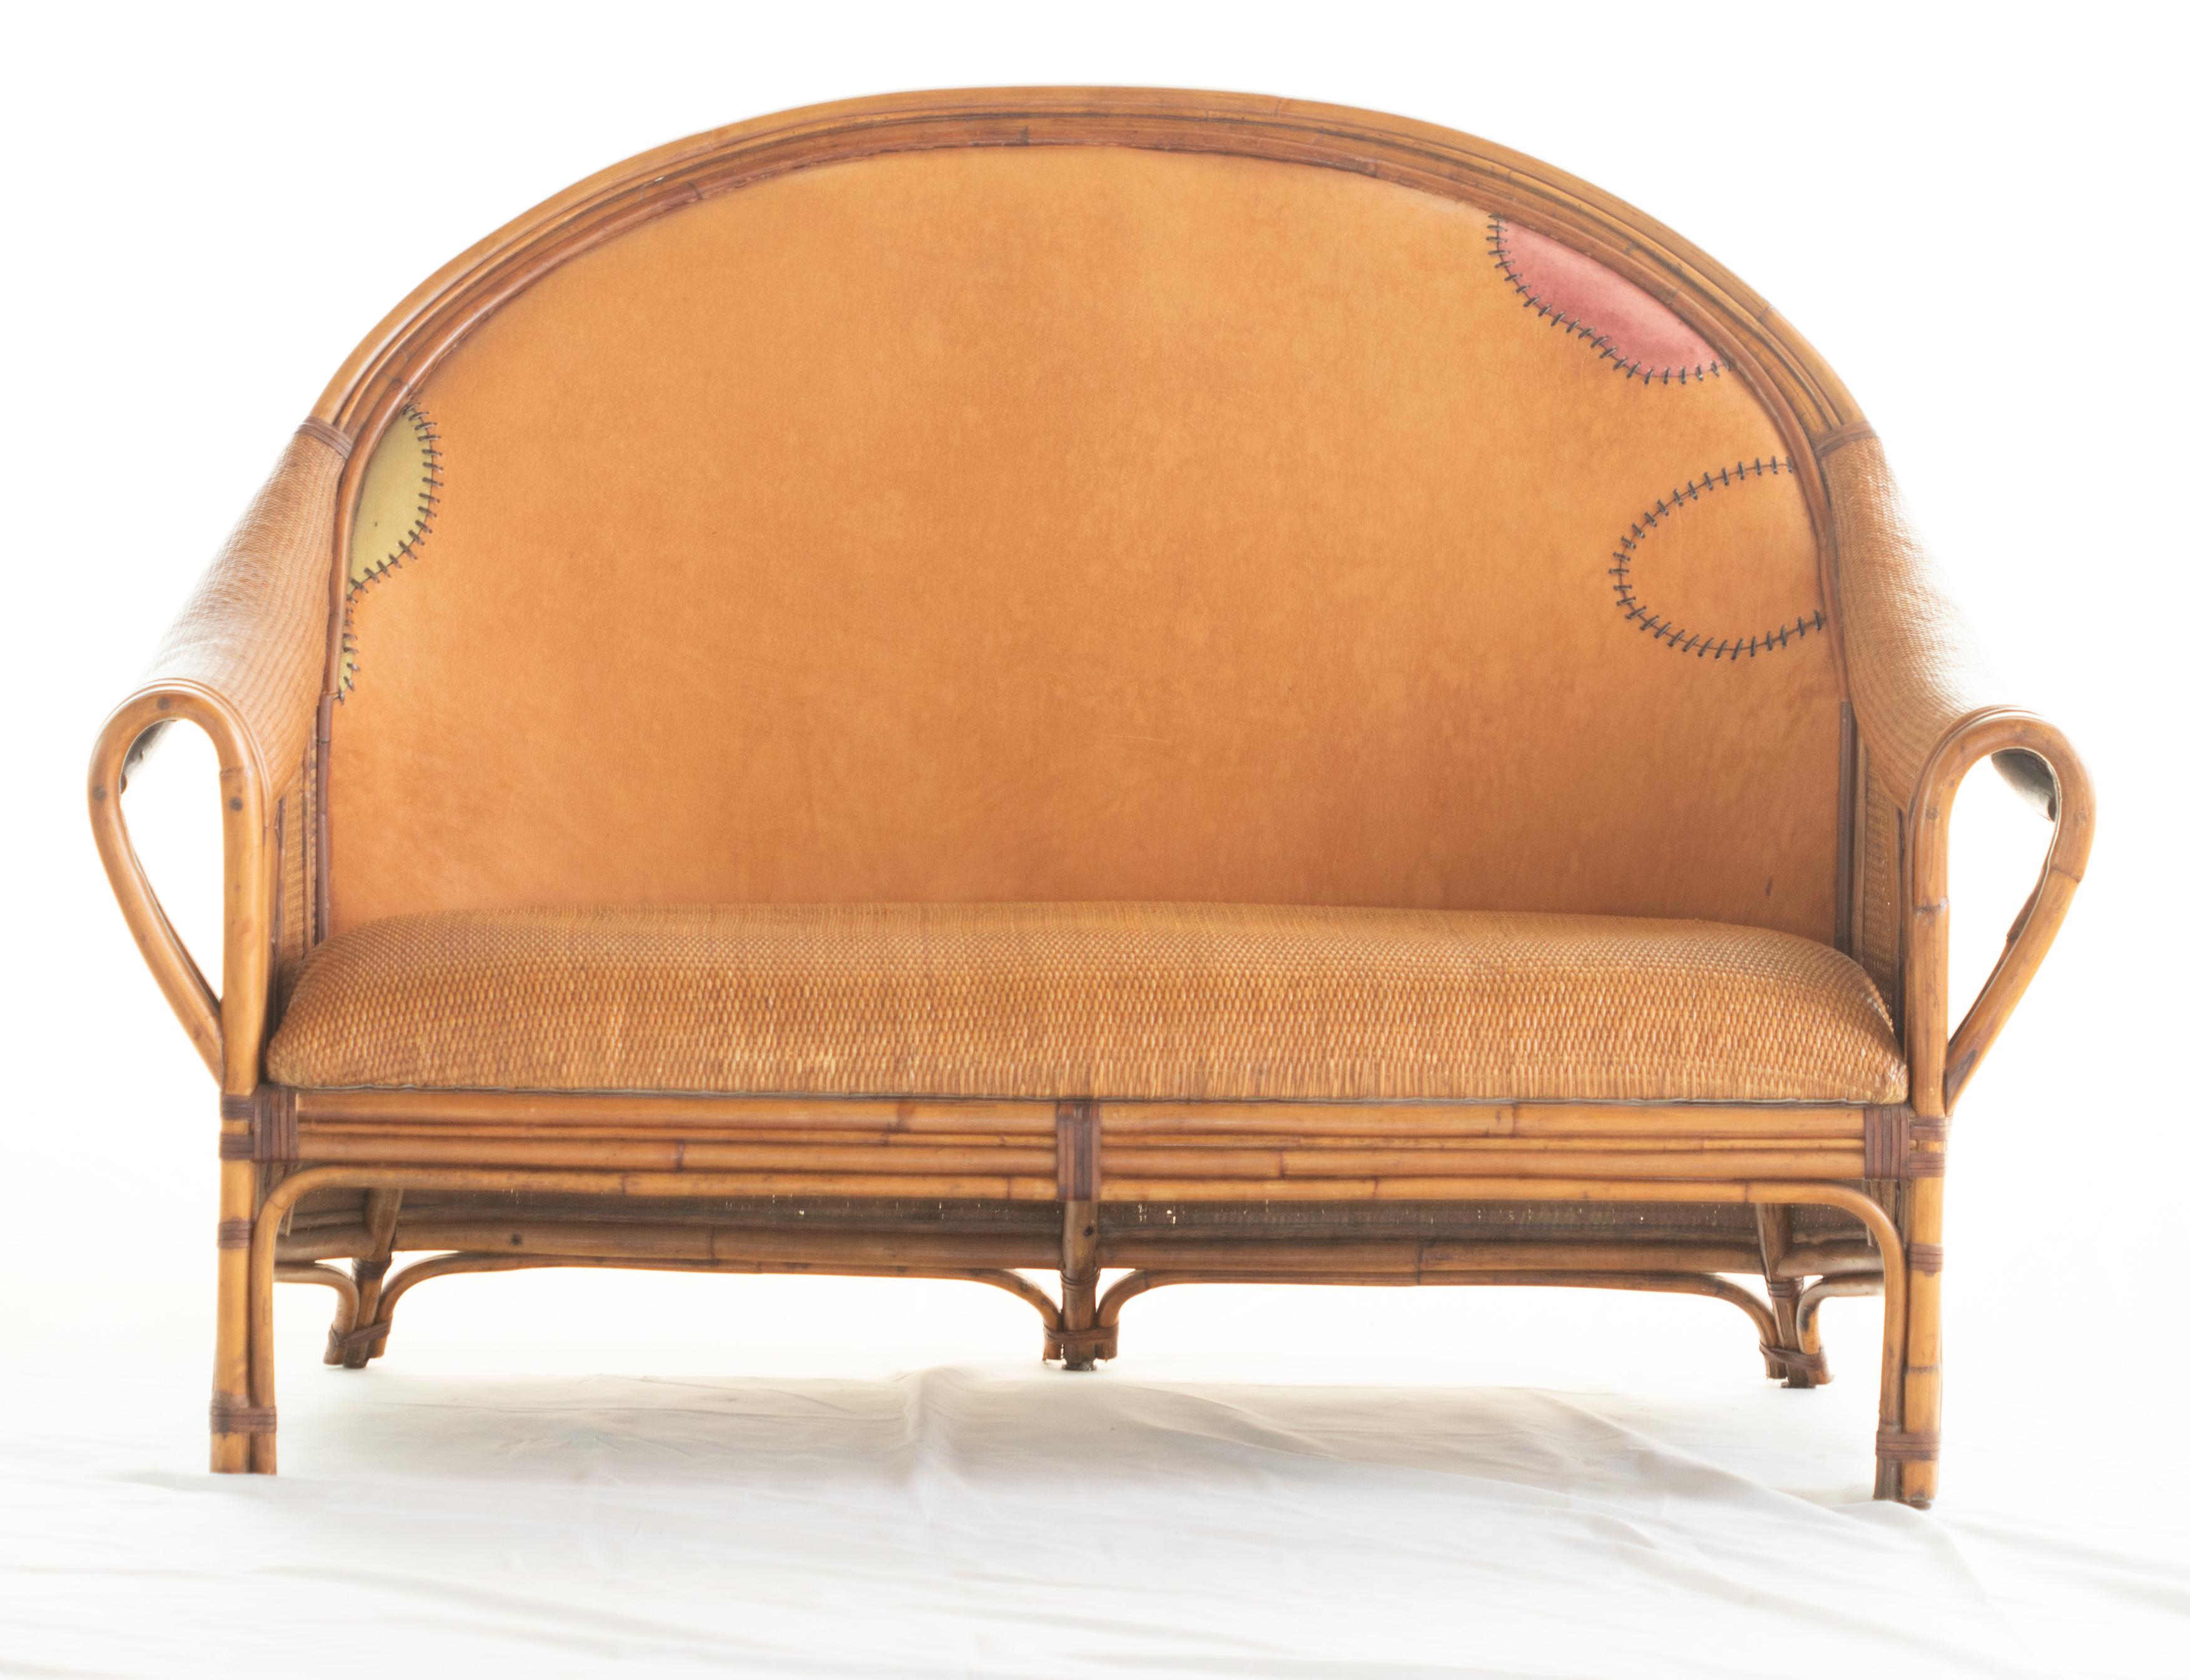 Modern curve sofa (2 seats) designed by Ramon Castellano (spanish designer), stamped for Kalma in Bamboo Wood, 20th Century. Collapsible rattan base reinforced with wrought iron. Seat is framed in rattan and crown is in wood. Bindings in leather.